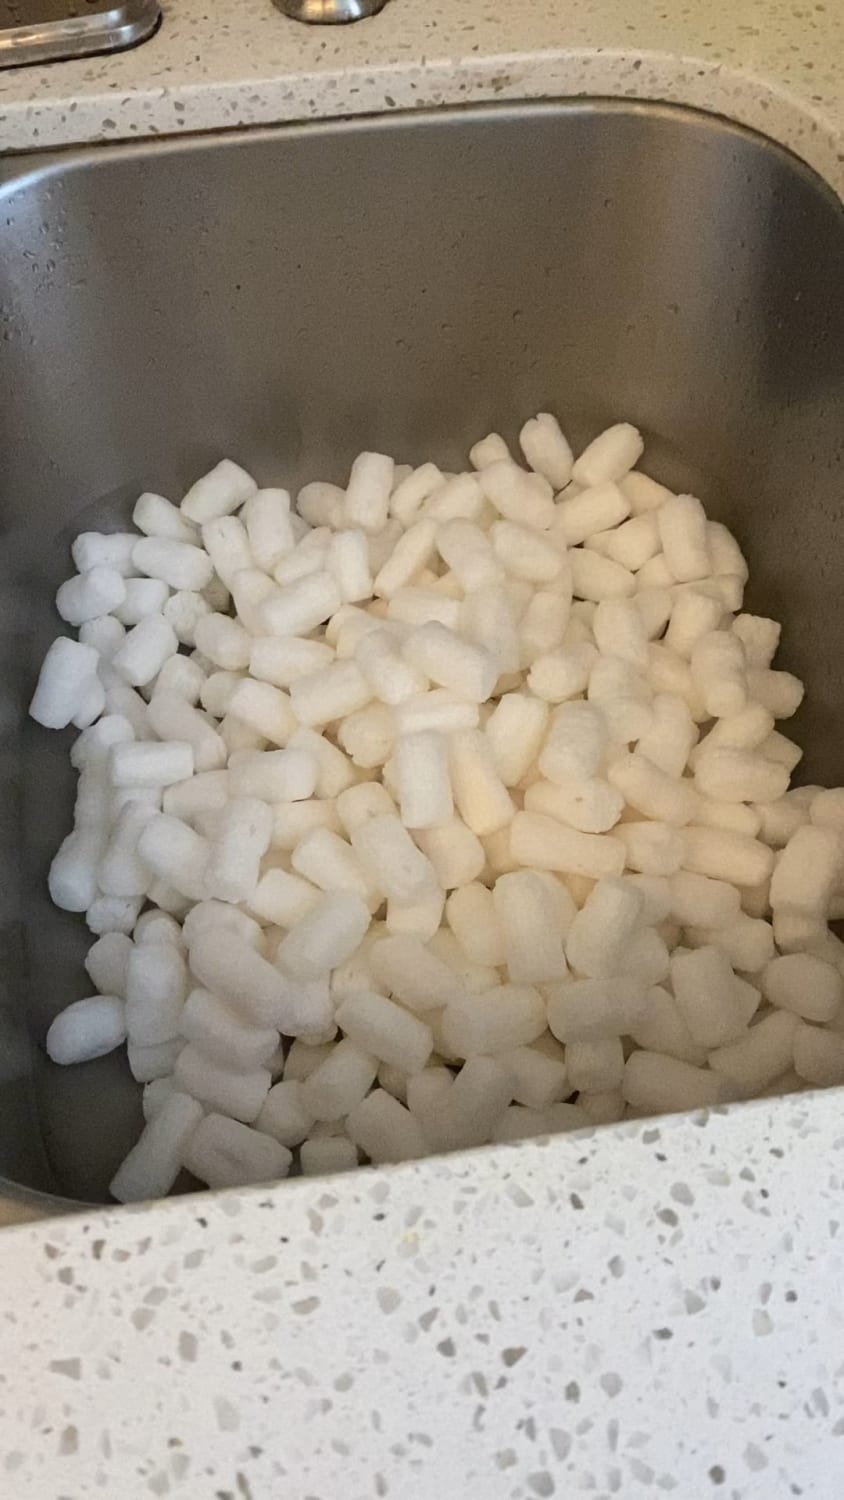 Package I got came with biodegradable packing peanuts